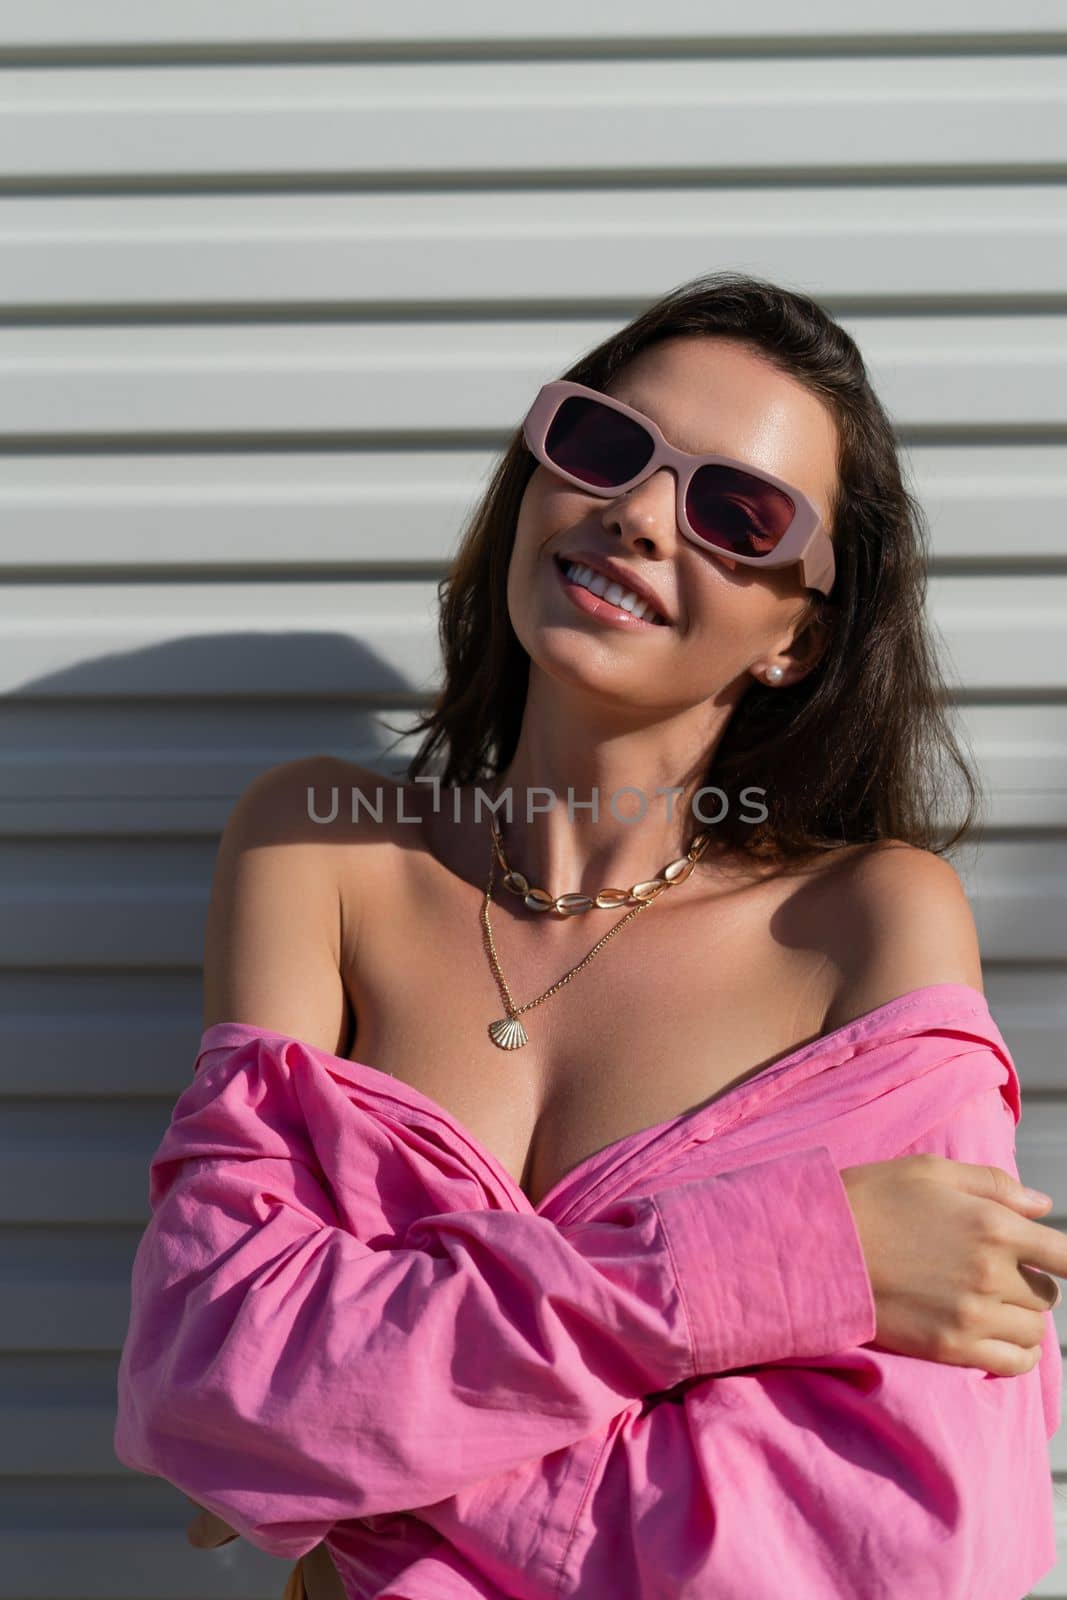 Young beautiful brunette in a pink shirt, neck jewelry, necklace, trendy sunglasses on the background of a light garage door fence